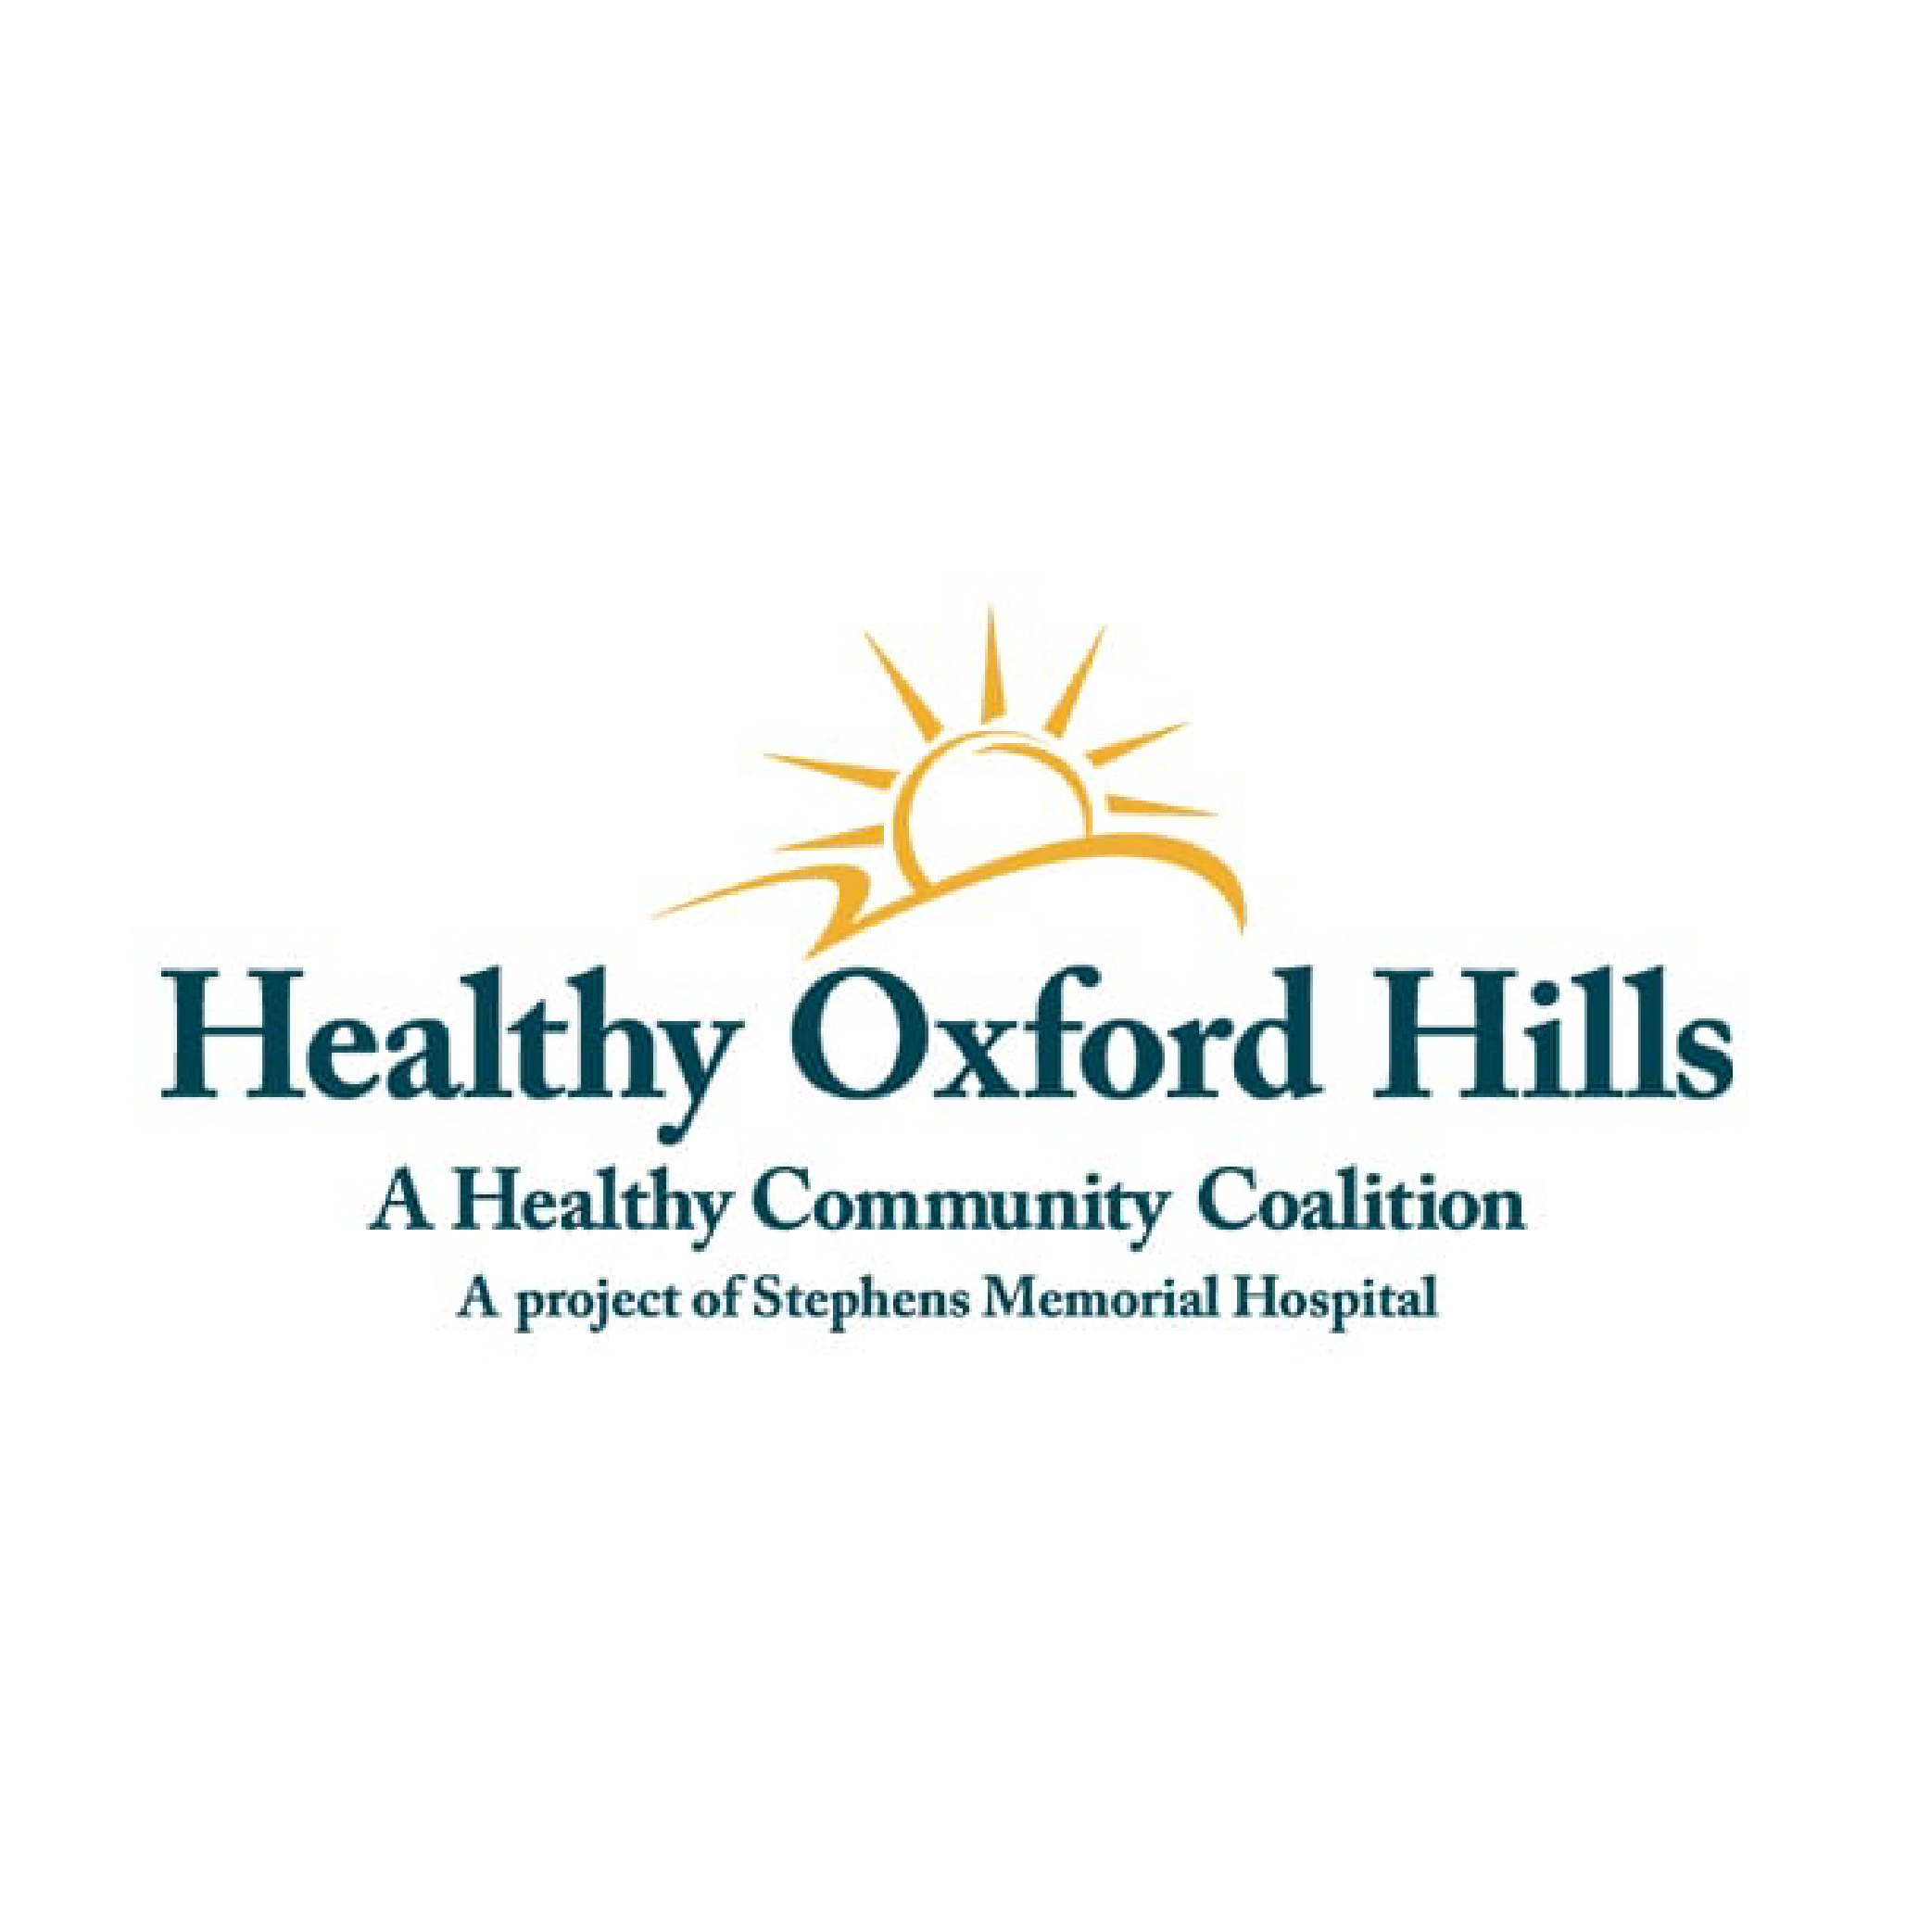 Healthy Oxford Hills A Healthy Community Coalition of Stephens Memorial Hospital logo